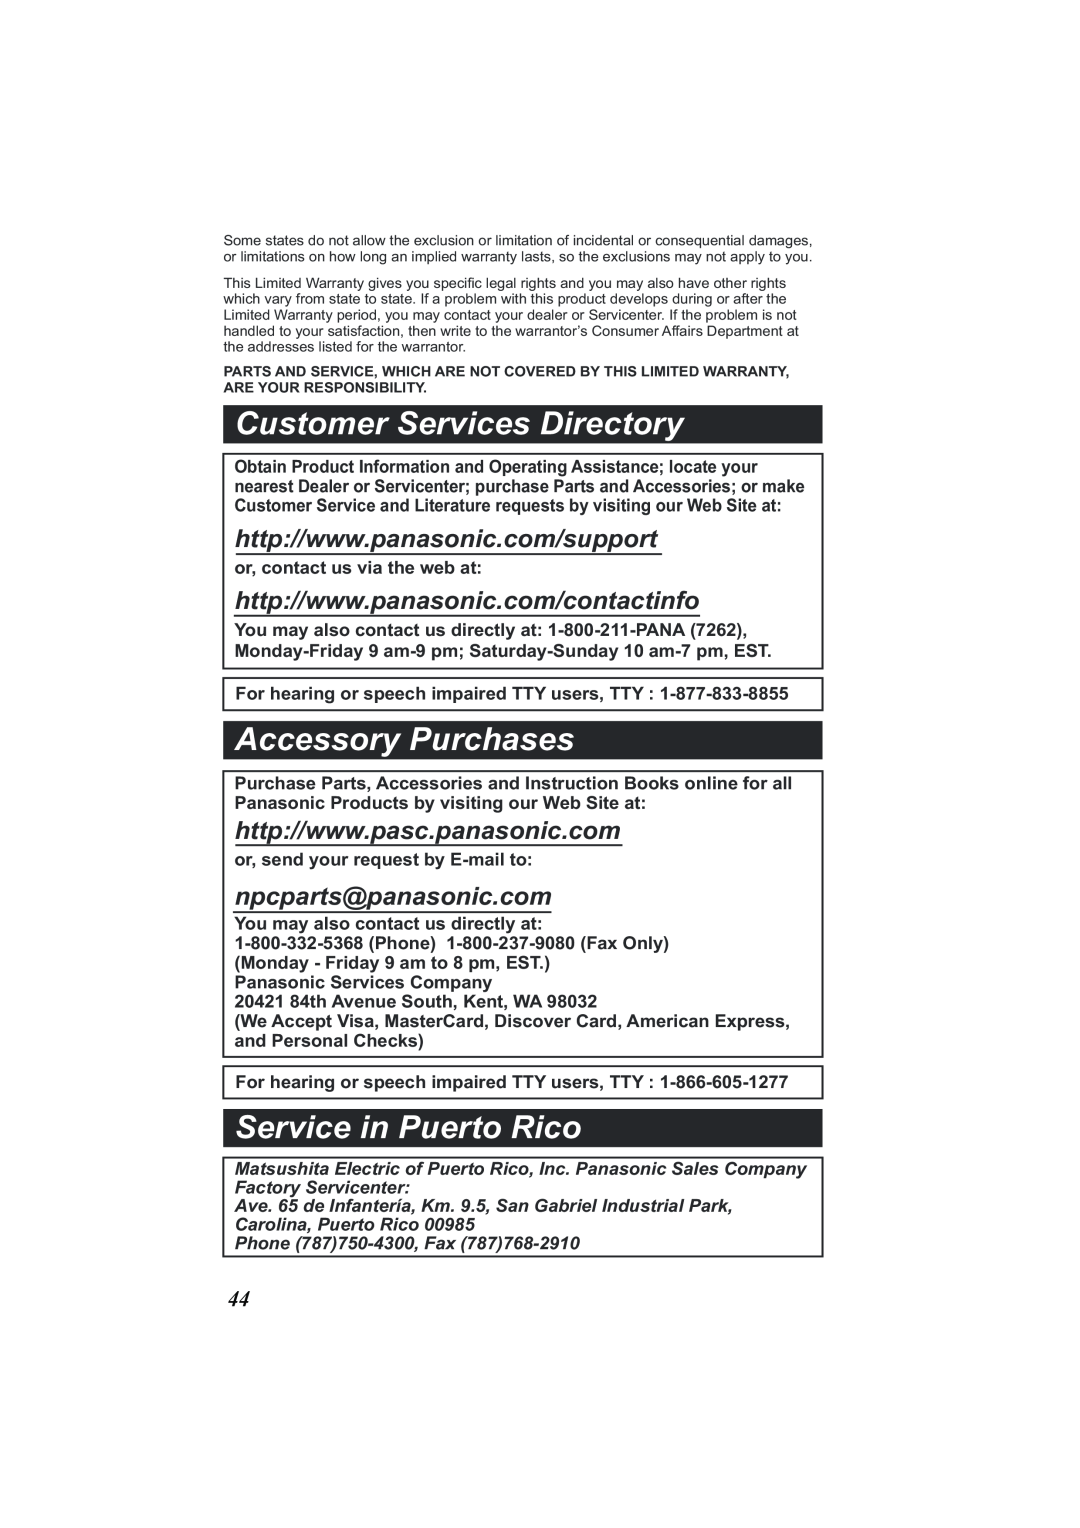 Panasonic Acr14CF.tmp manual Customer Services Directory, Accessory Purchases, Service in Puerto Rico 